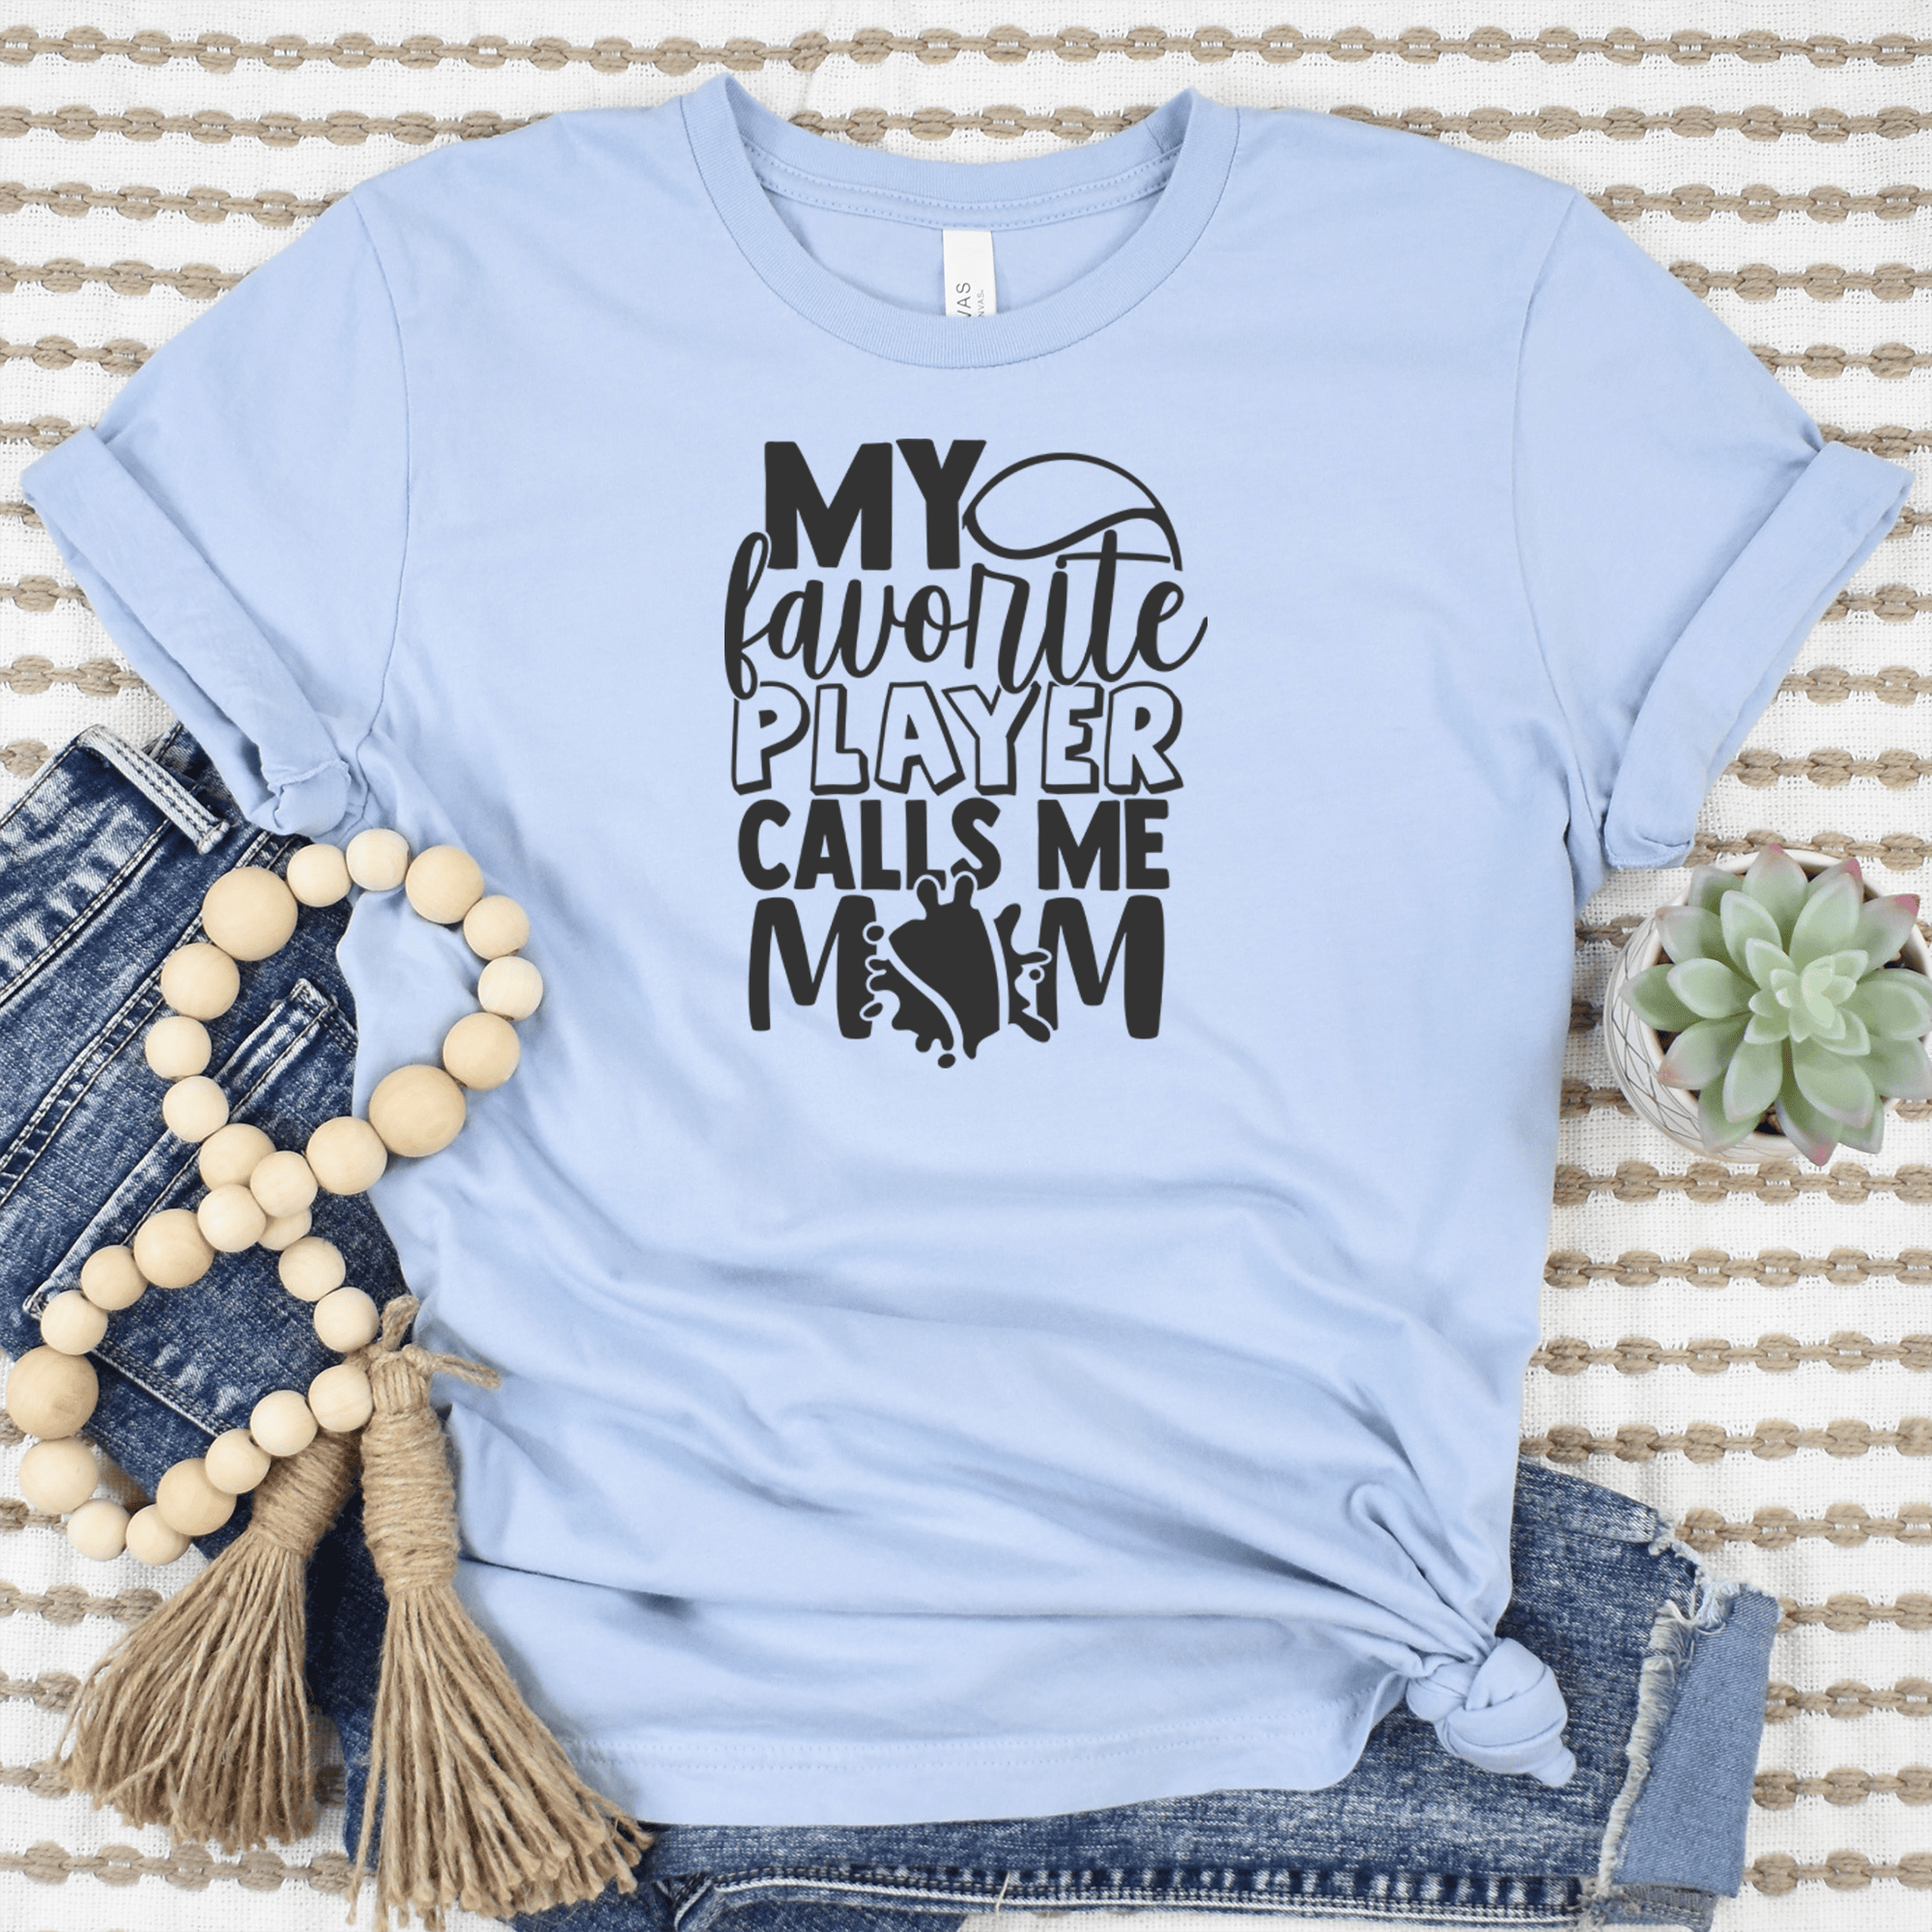 Womens Light Blue T Shirt with That-Tennis-Player-Calls-Me-Mom design